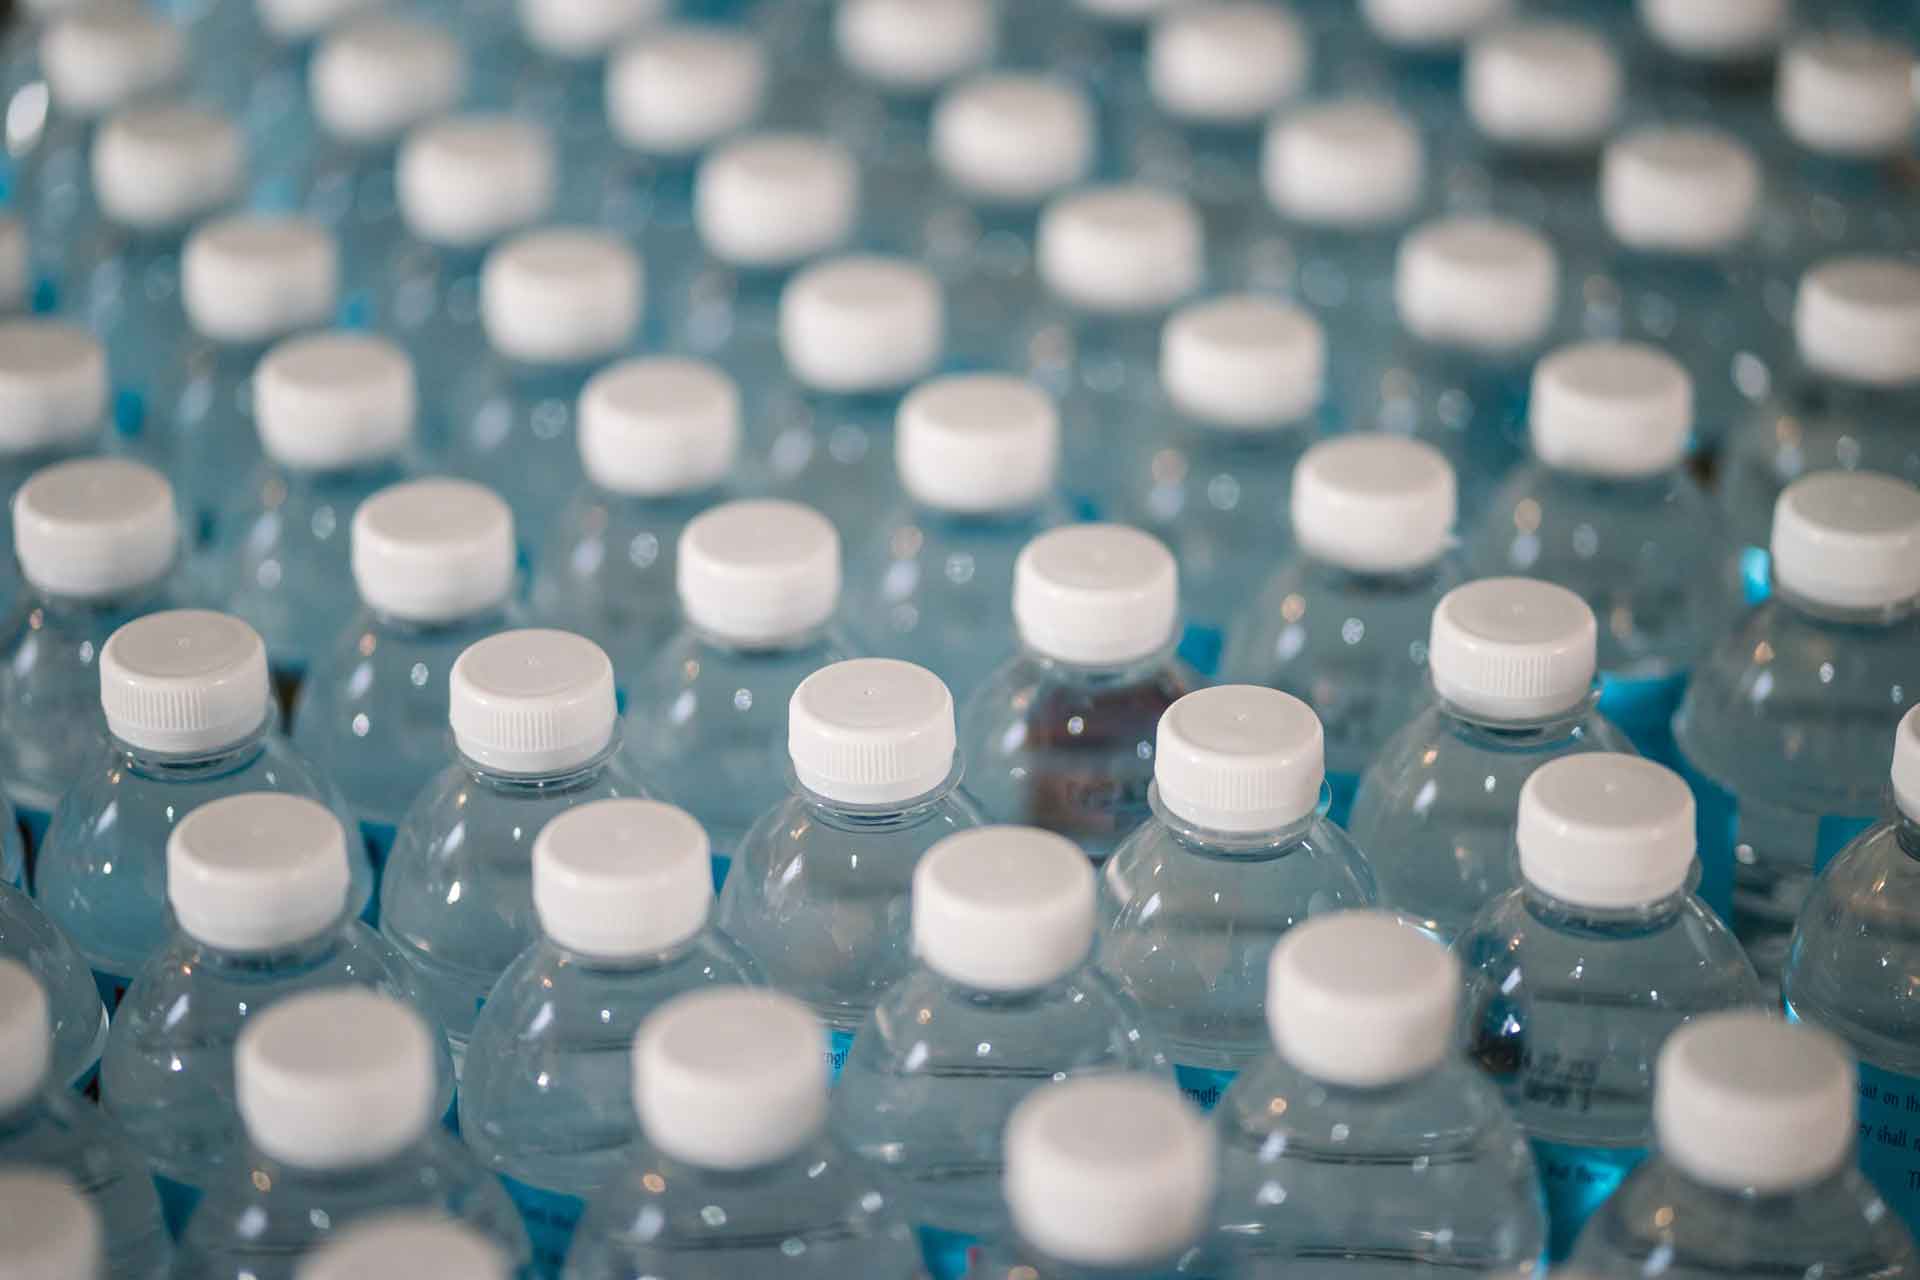 Rows of plastic water bottles with white plastic caps